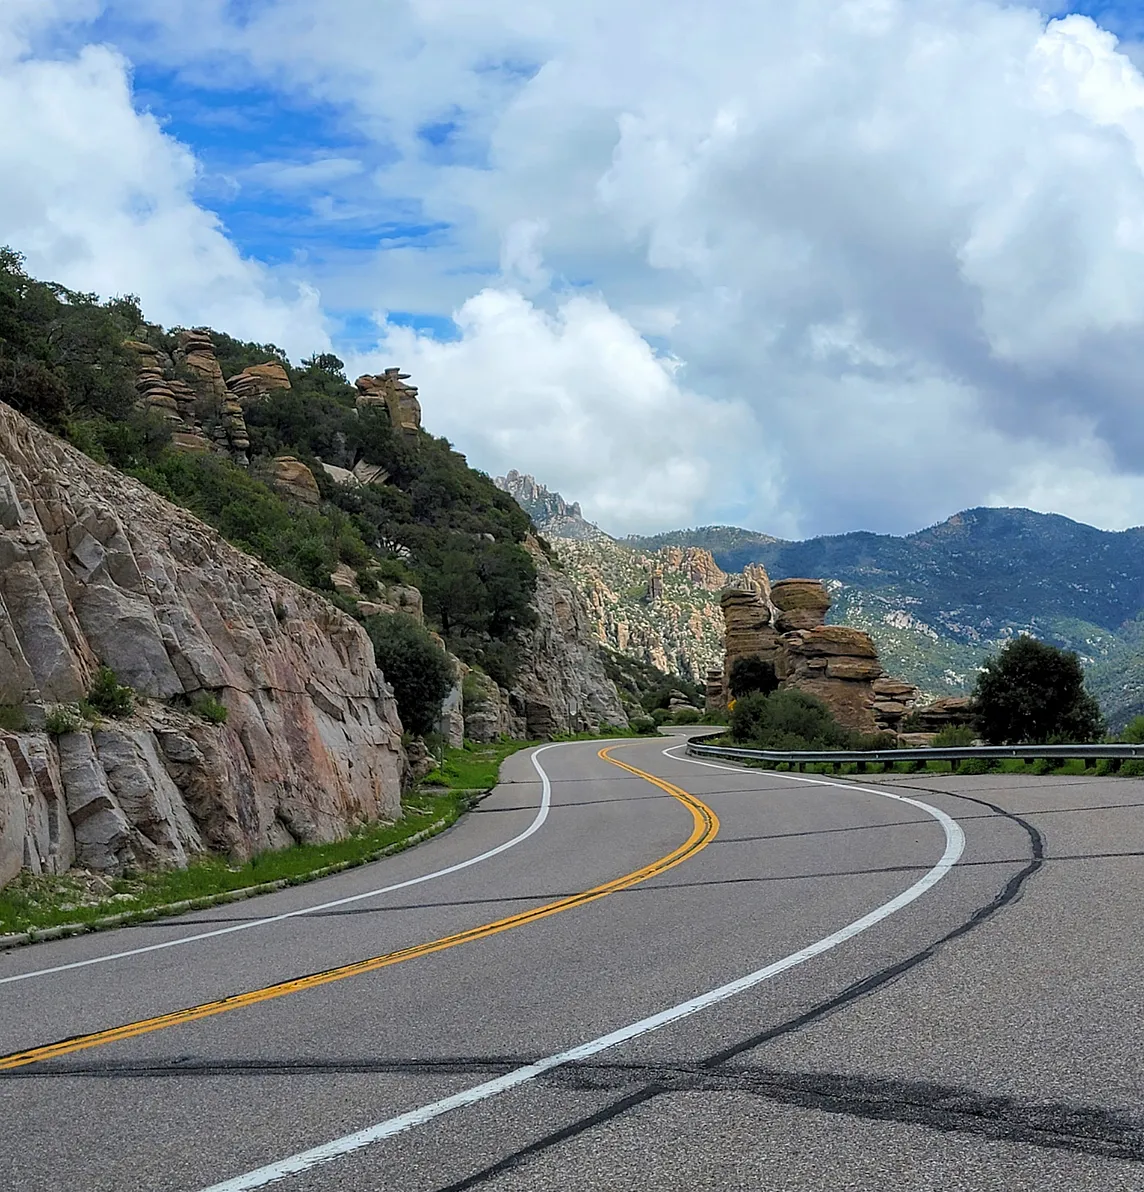 A winding highway going through hoodoo rock formations with green mountains and clouds in the background